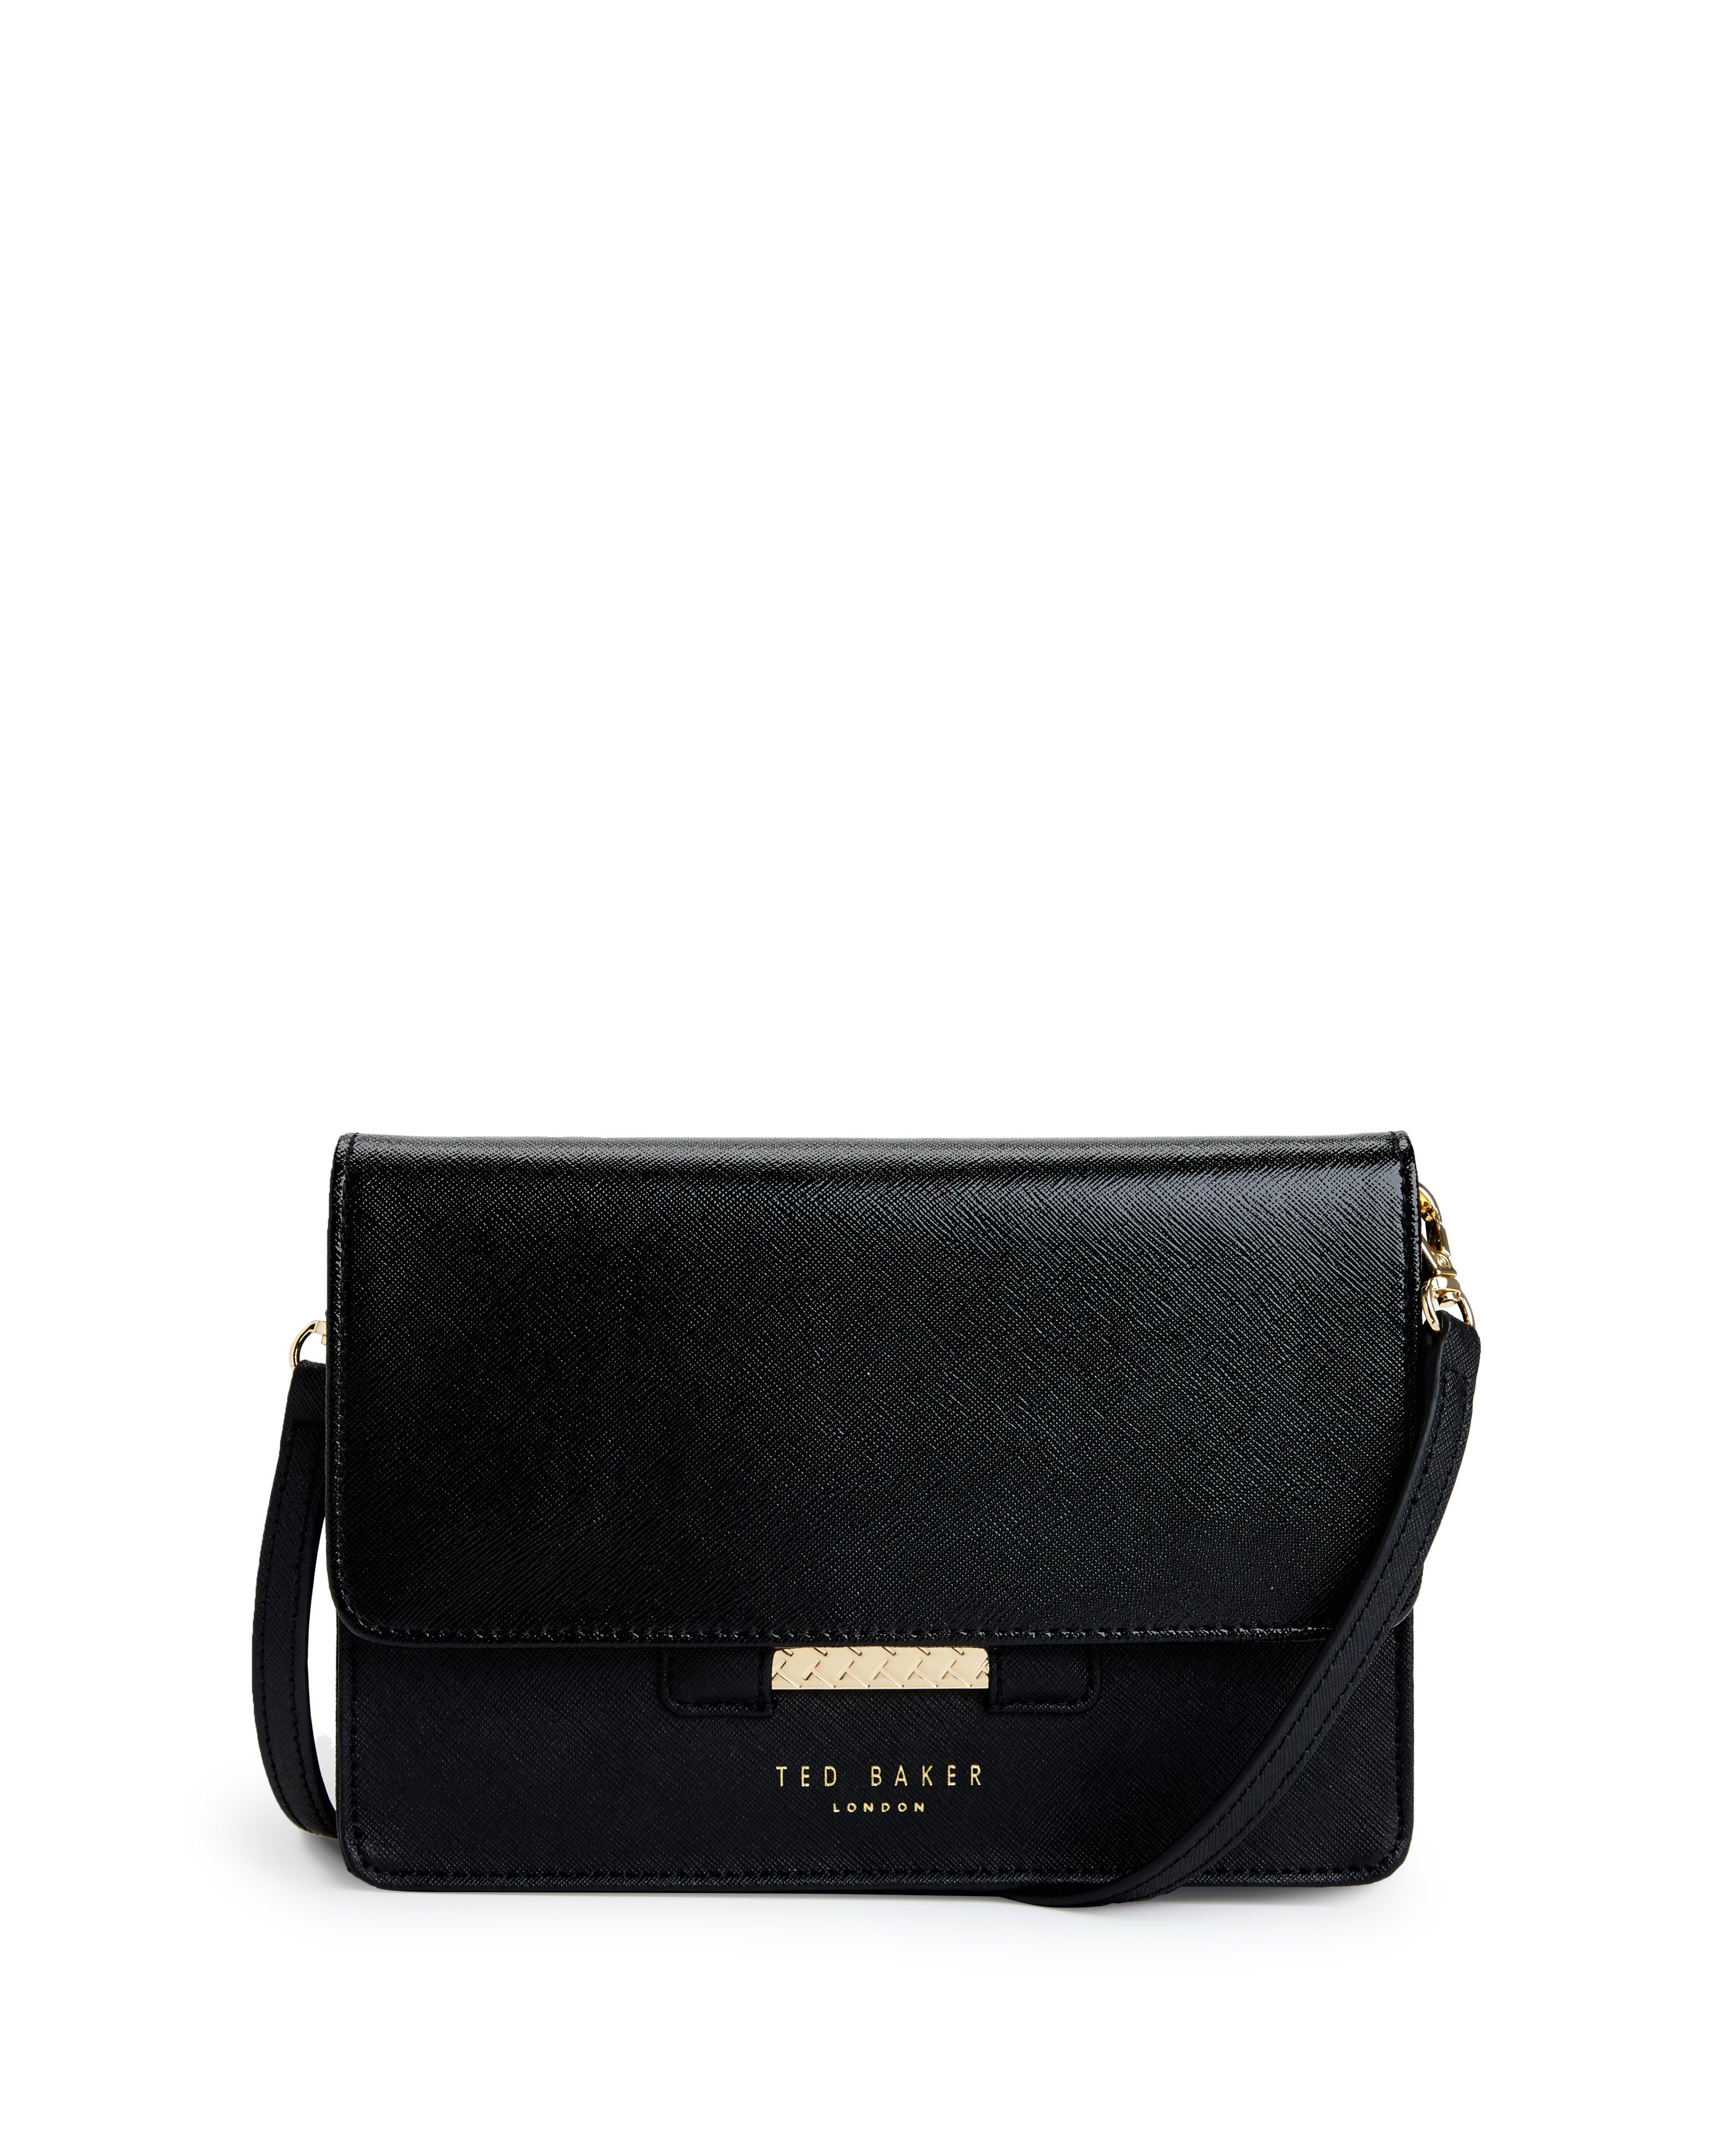 Brand New Black Leather Cross Body Bag Ted Baker | IUCN Water